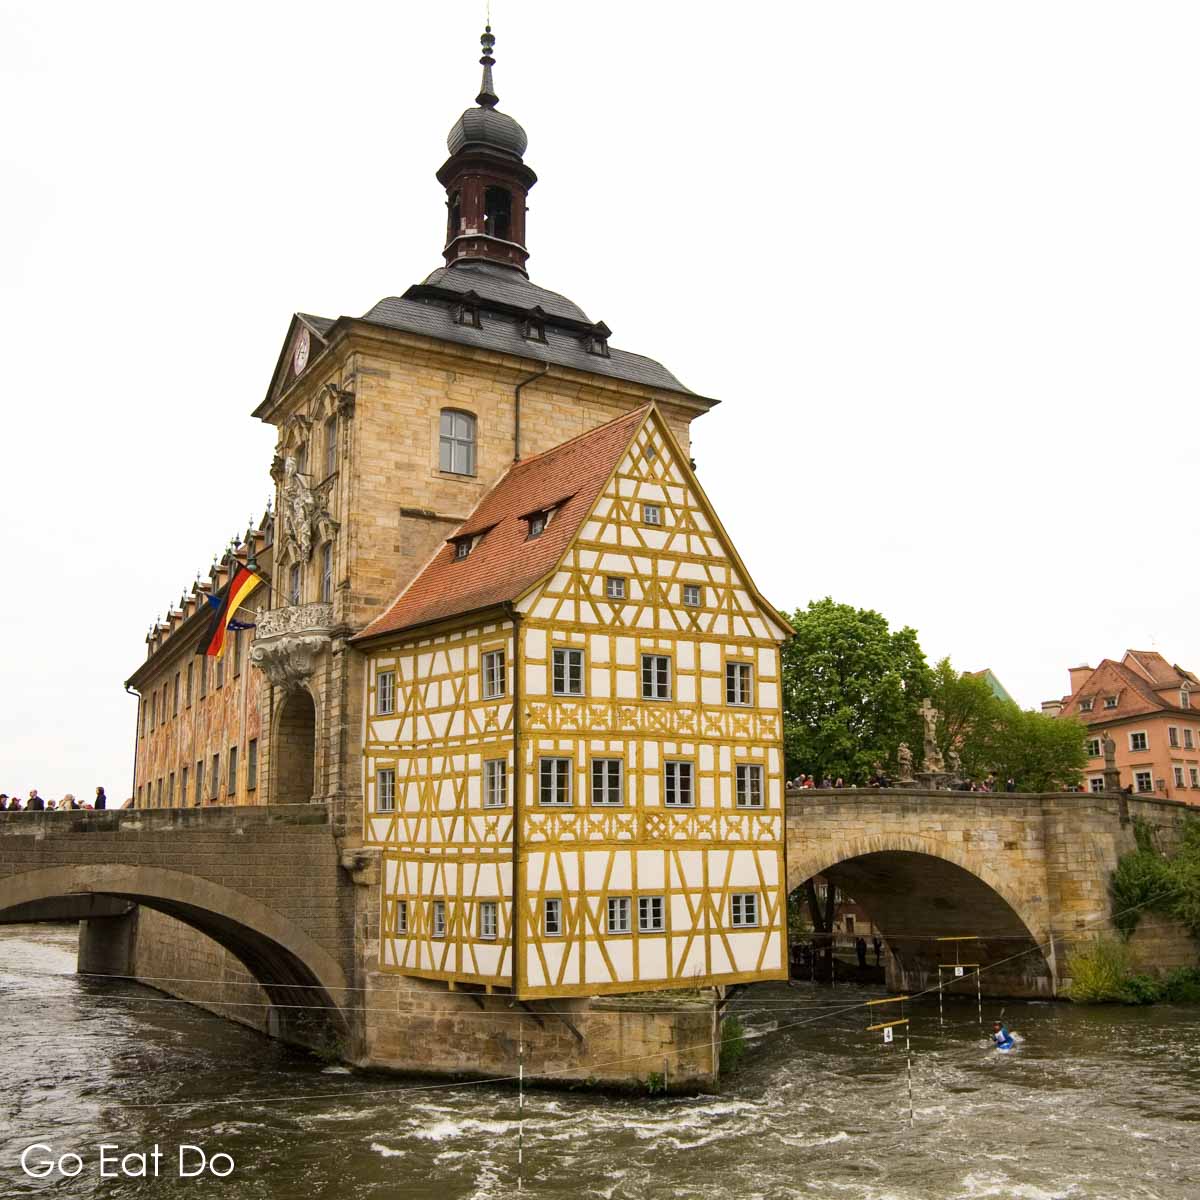 The town hall in Bamberg, the host city of the Gustav Mahler Conducting Competition.